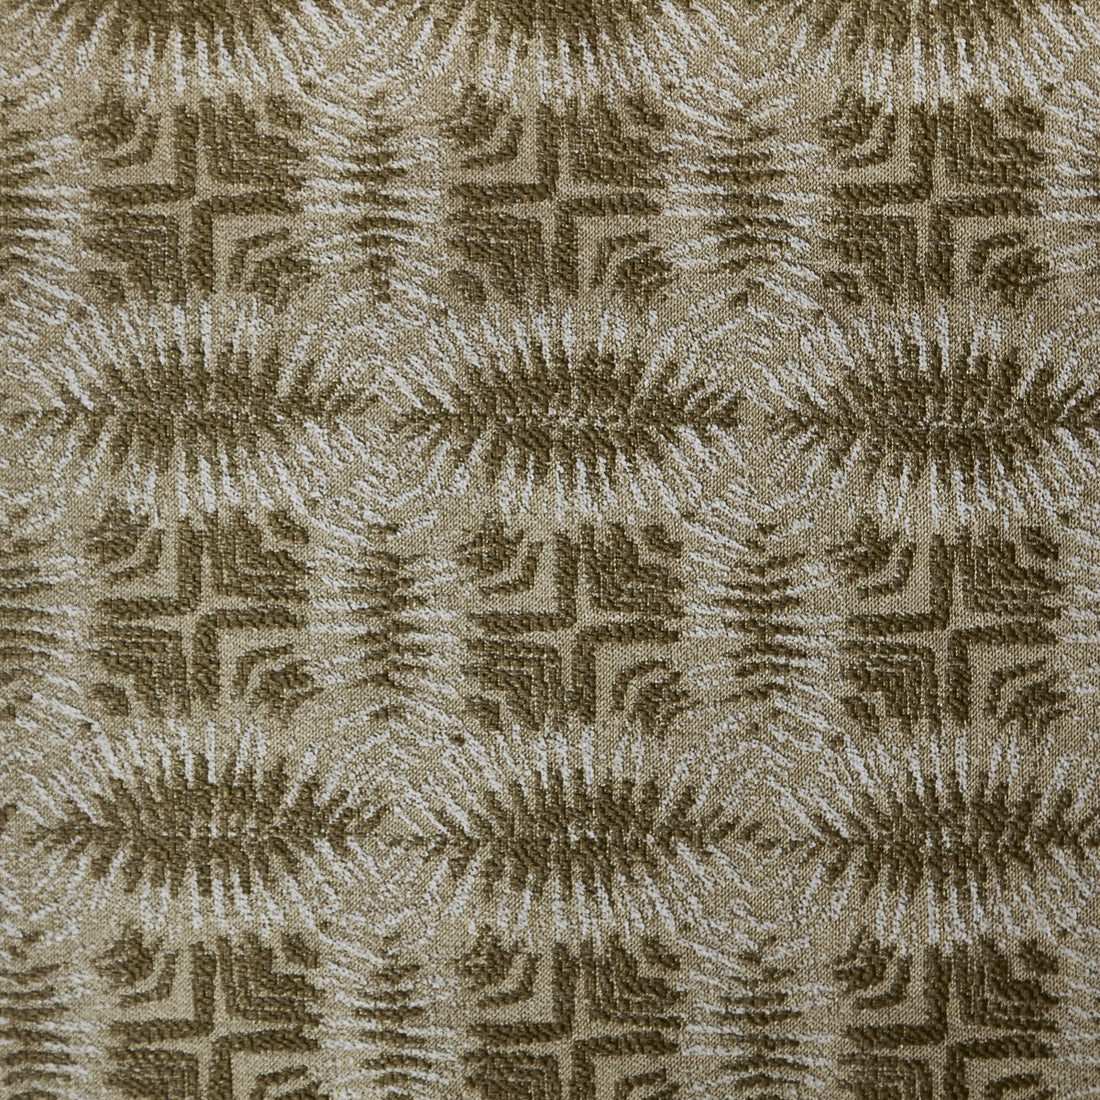 Calypso fabric in natural color - pattern GWF-3204.16.0 - by Lee Jofa Modern in the Allegra Hicks Islands collection